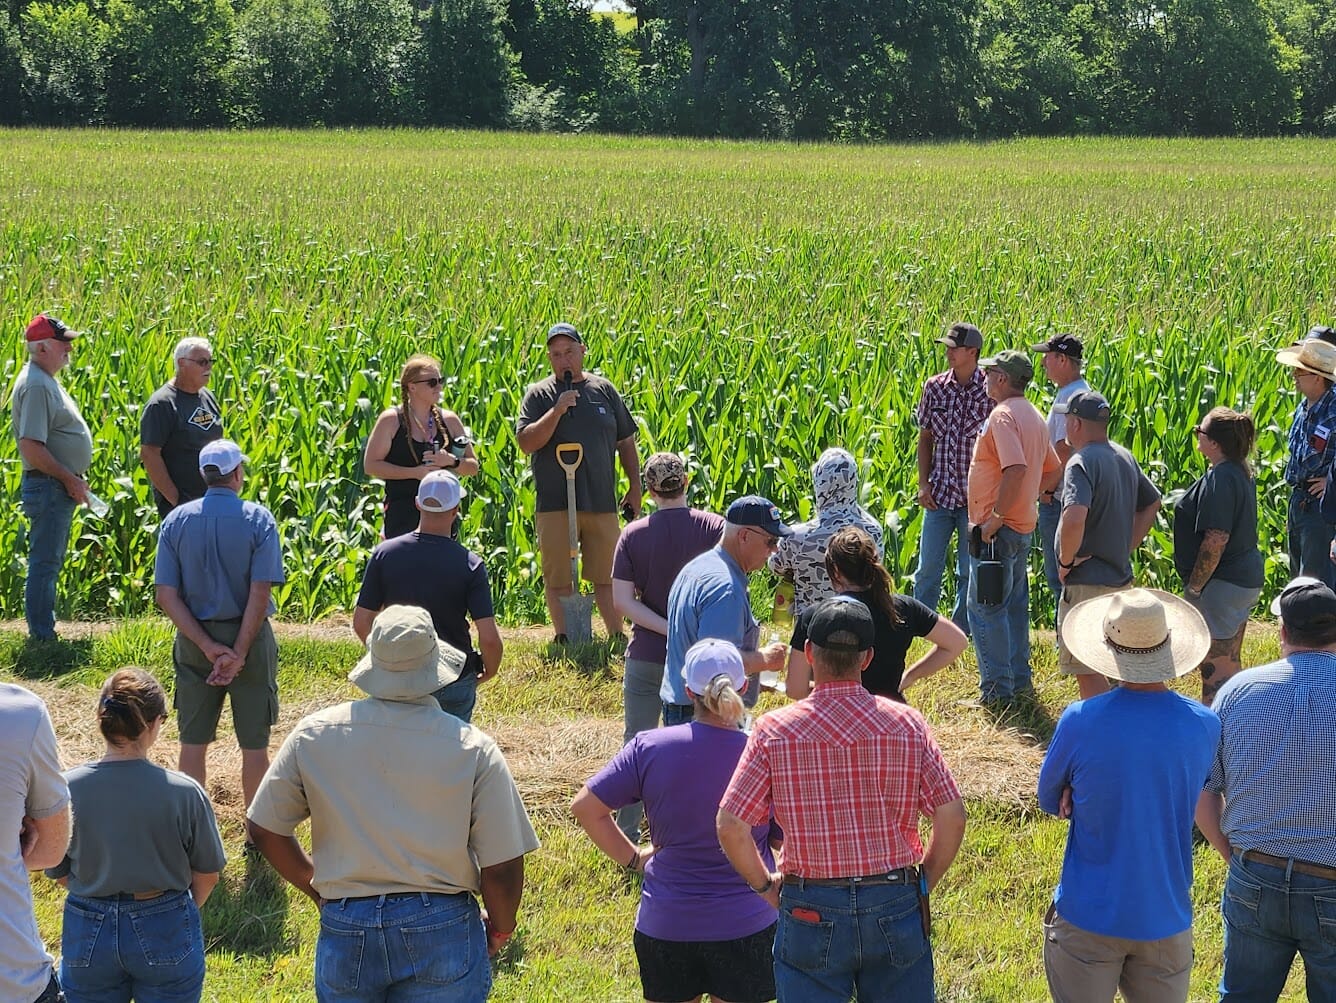 a crowd of about 20 people stand in front of a corn field. A man at the front of the crowd has a shovel and speaks into a microphone.